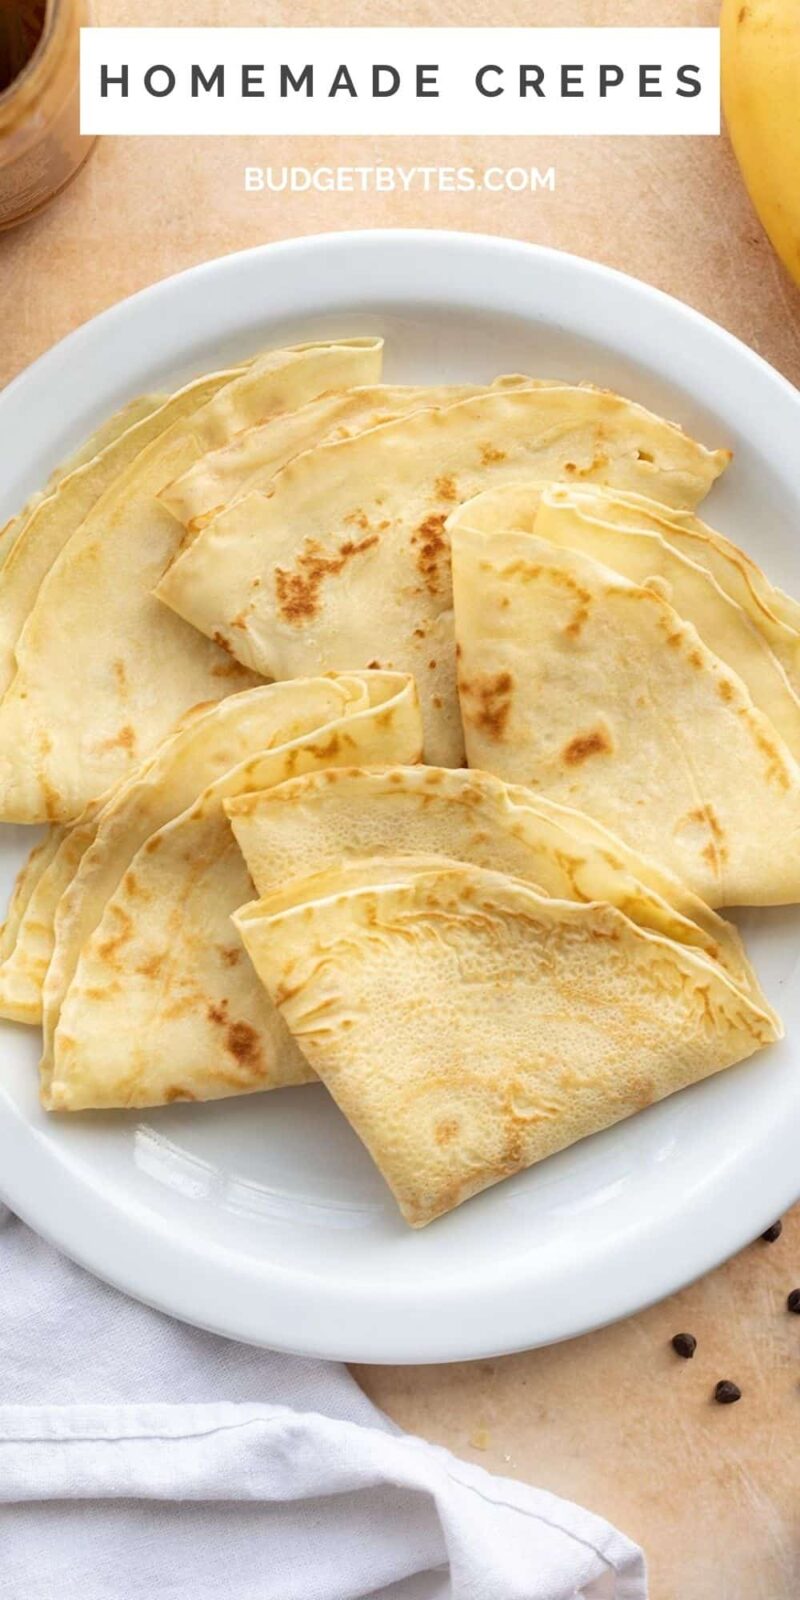 Several folded crepes on a plate.